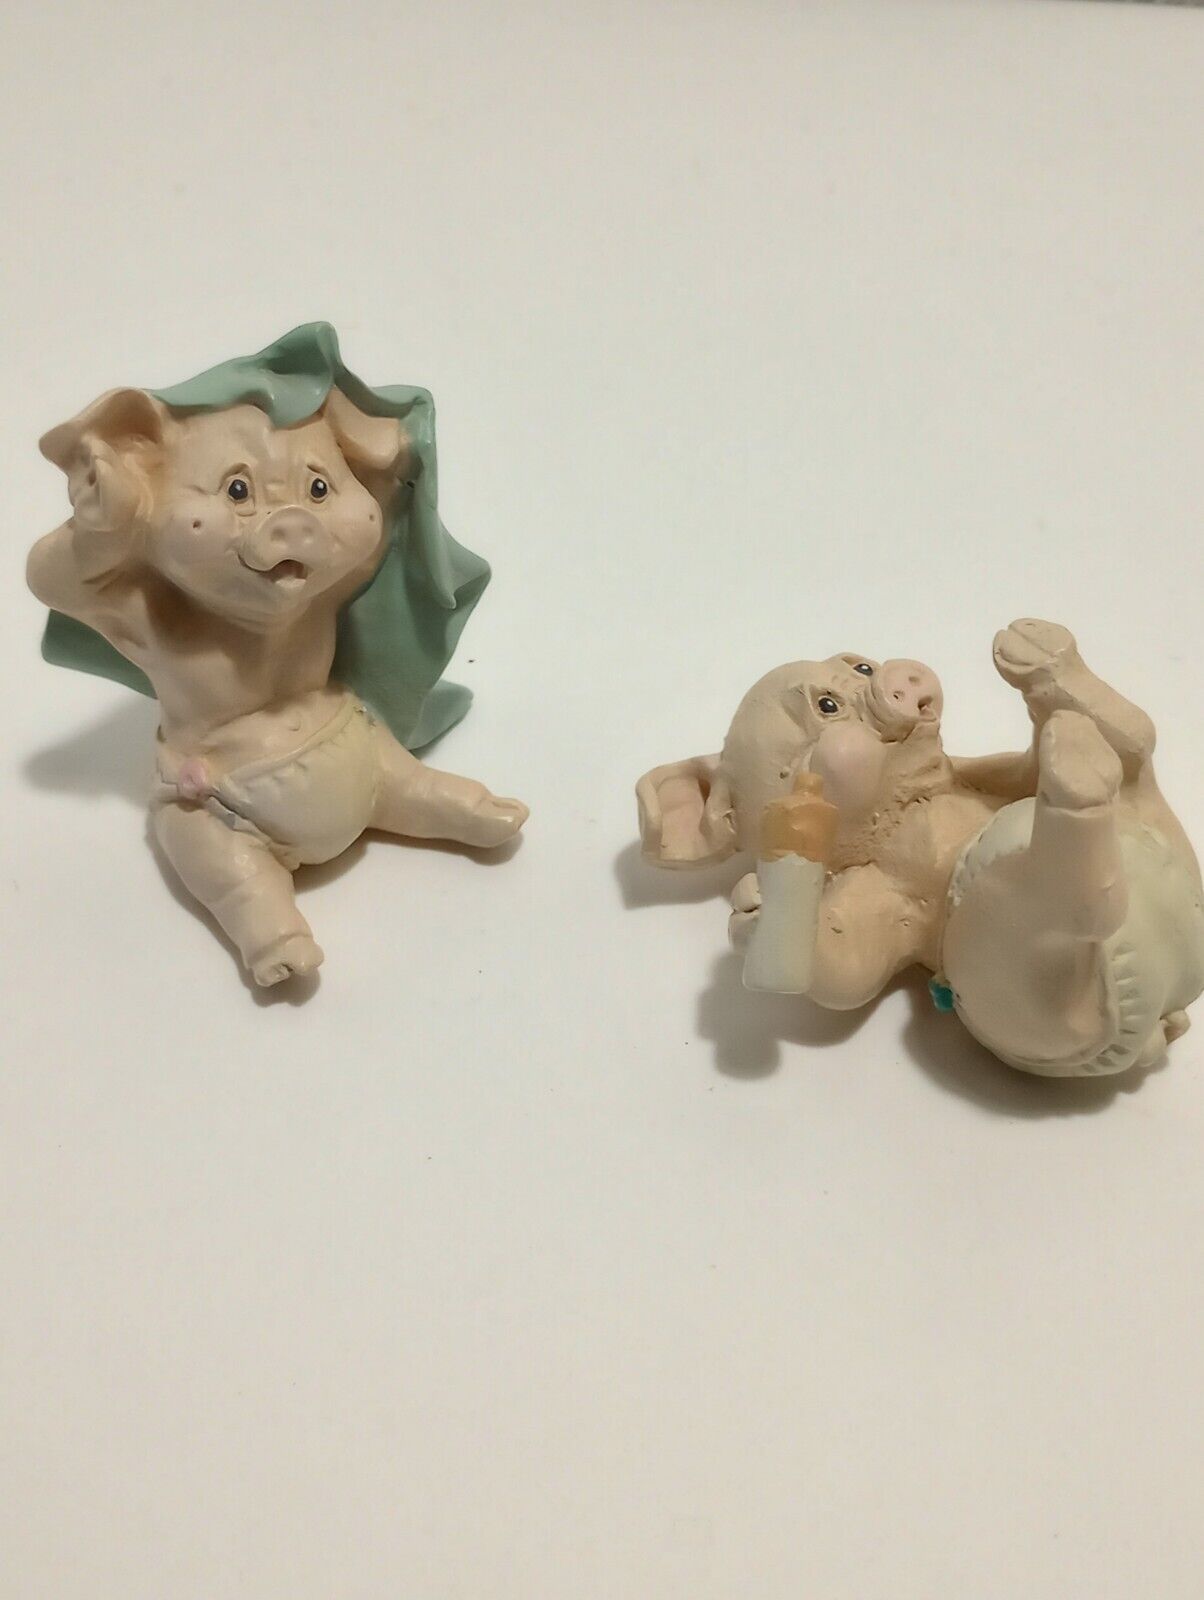 Vintage 1991 Mini Playful Baby Pigs In Diapers Figurines Kathy Wise Collection